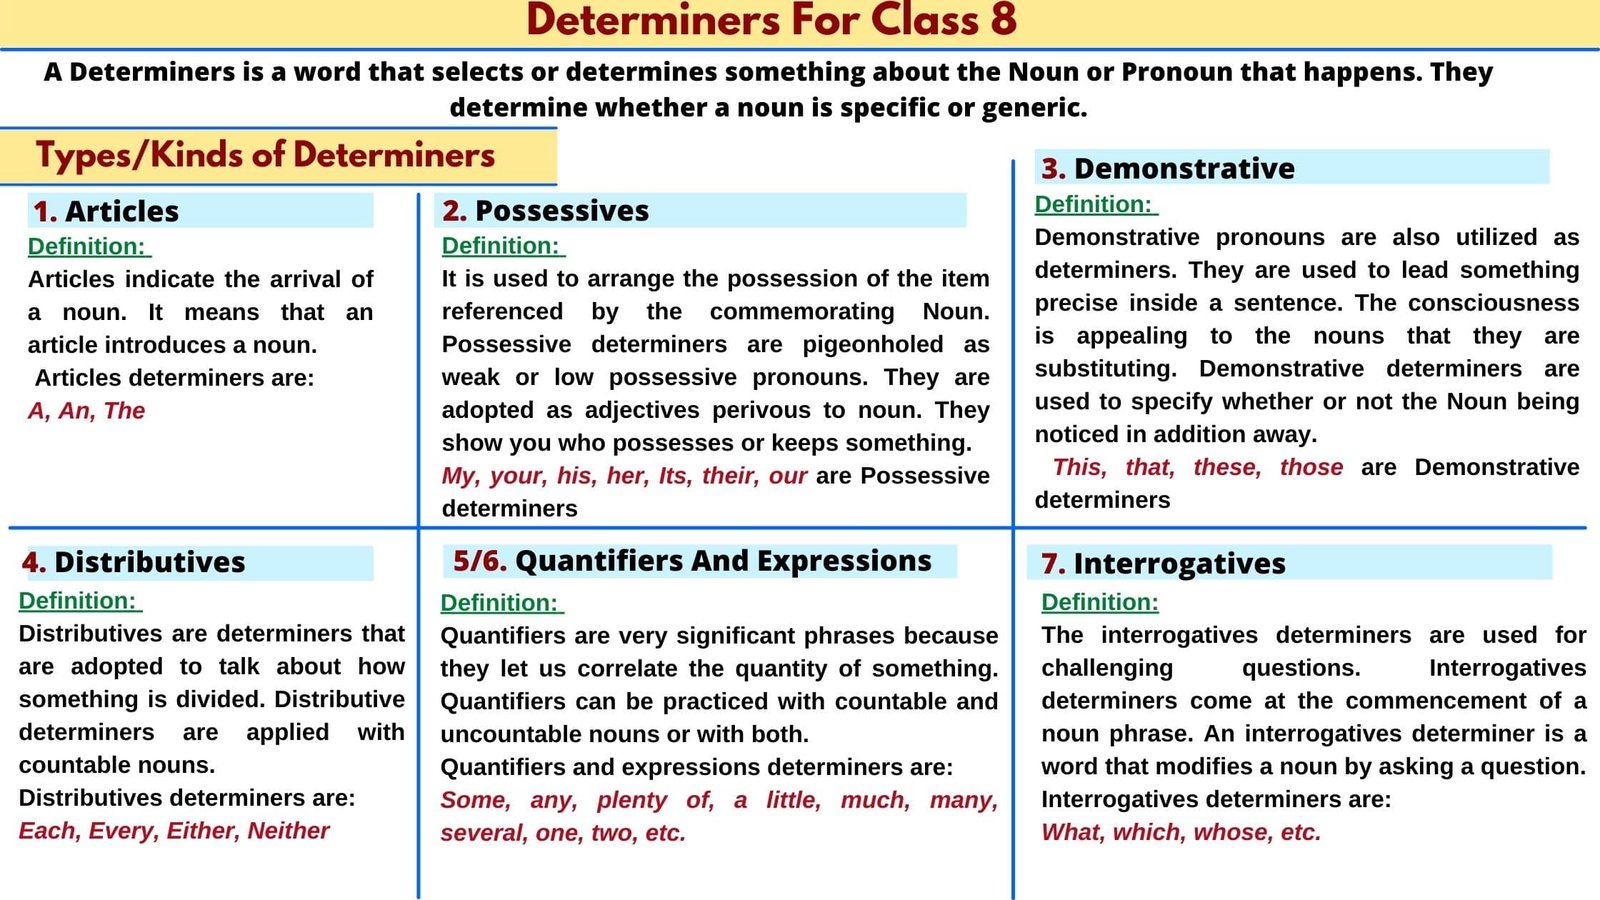 Determiners For Class 8, Definition, examples, types of determiners, 7 types of determiners